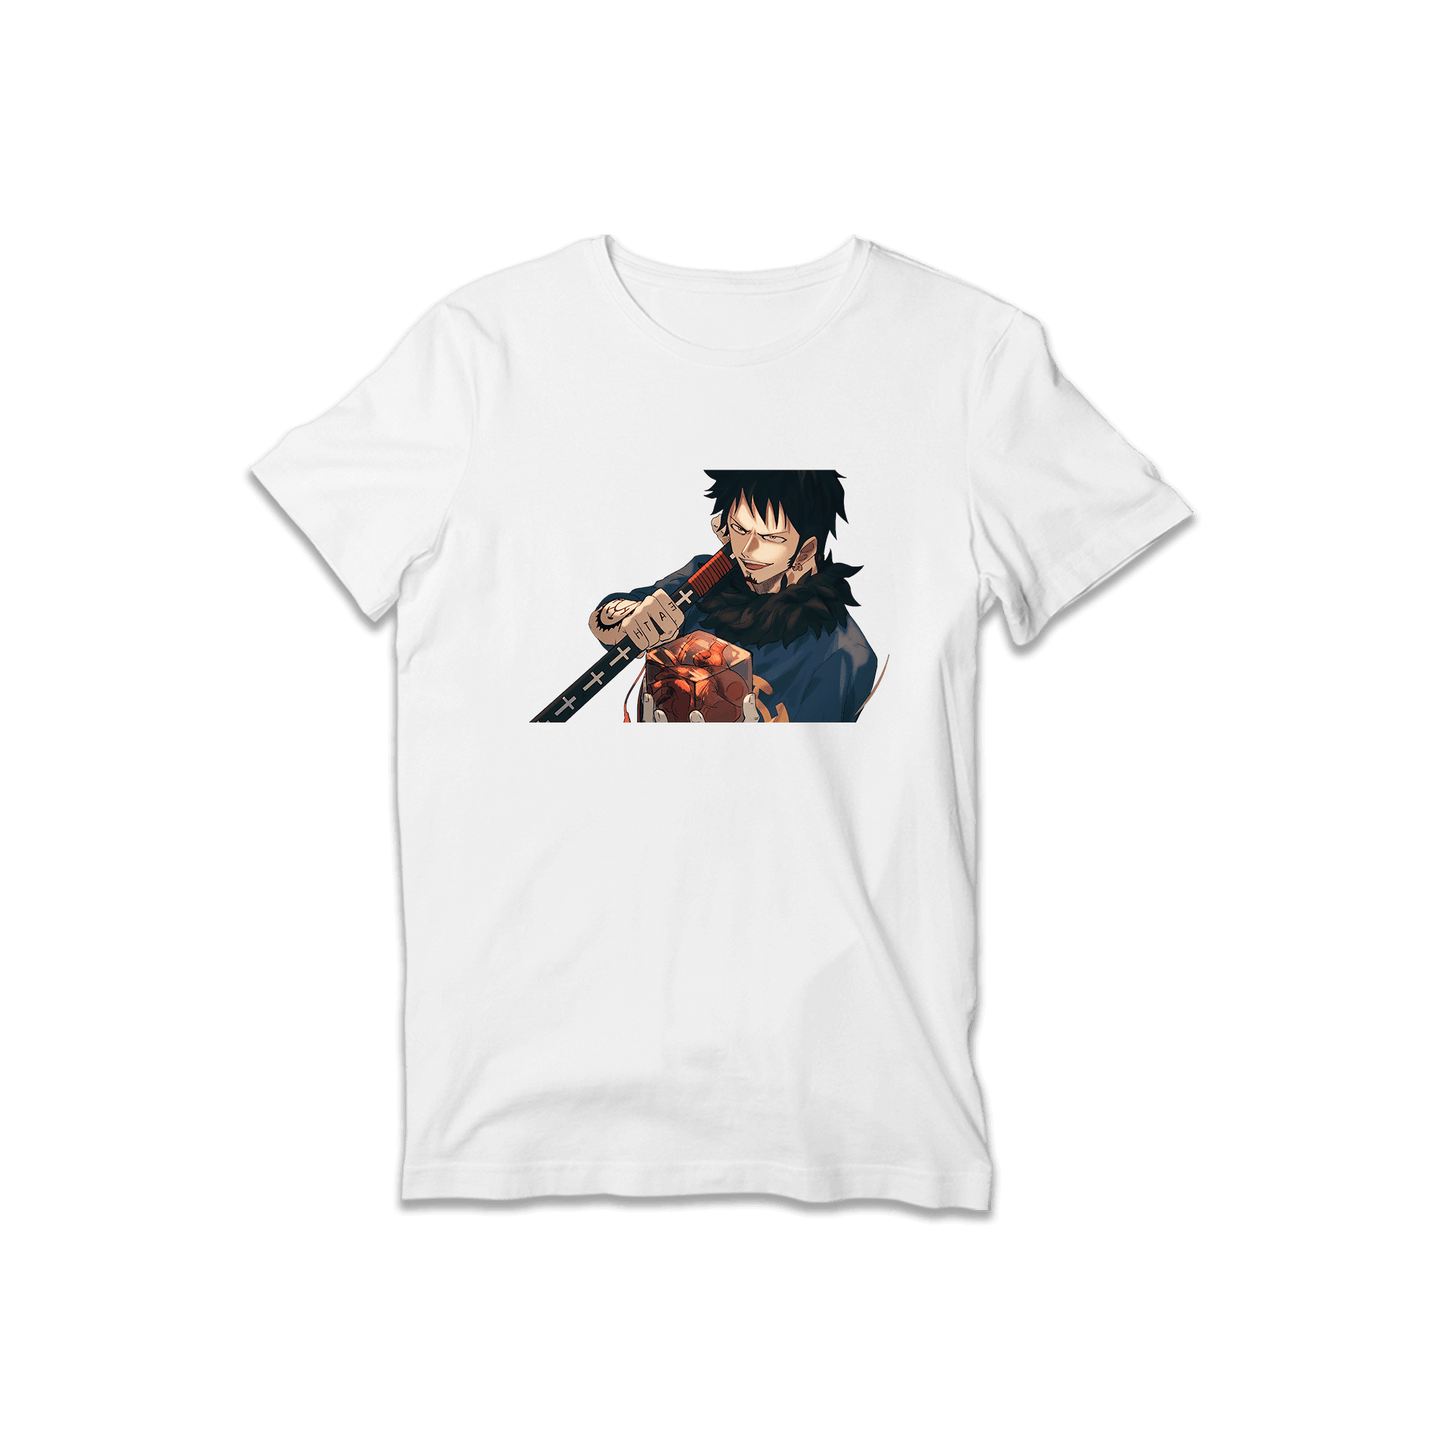 Law - One Piece T-Shirt